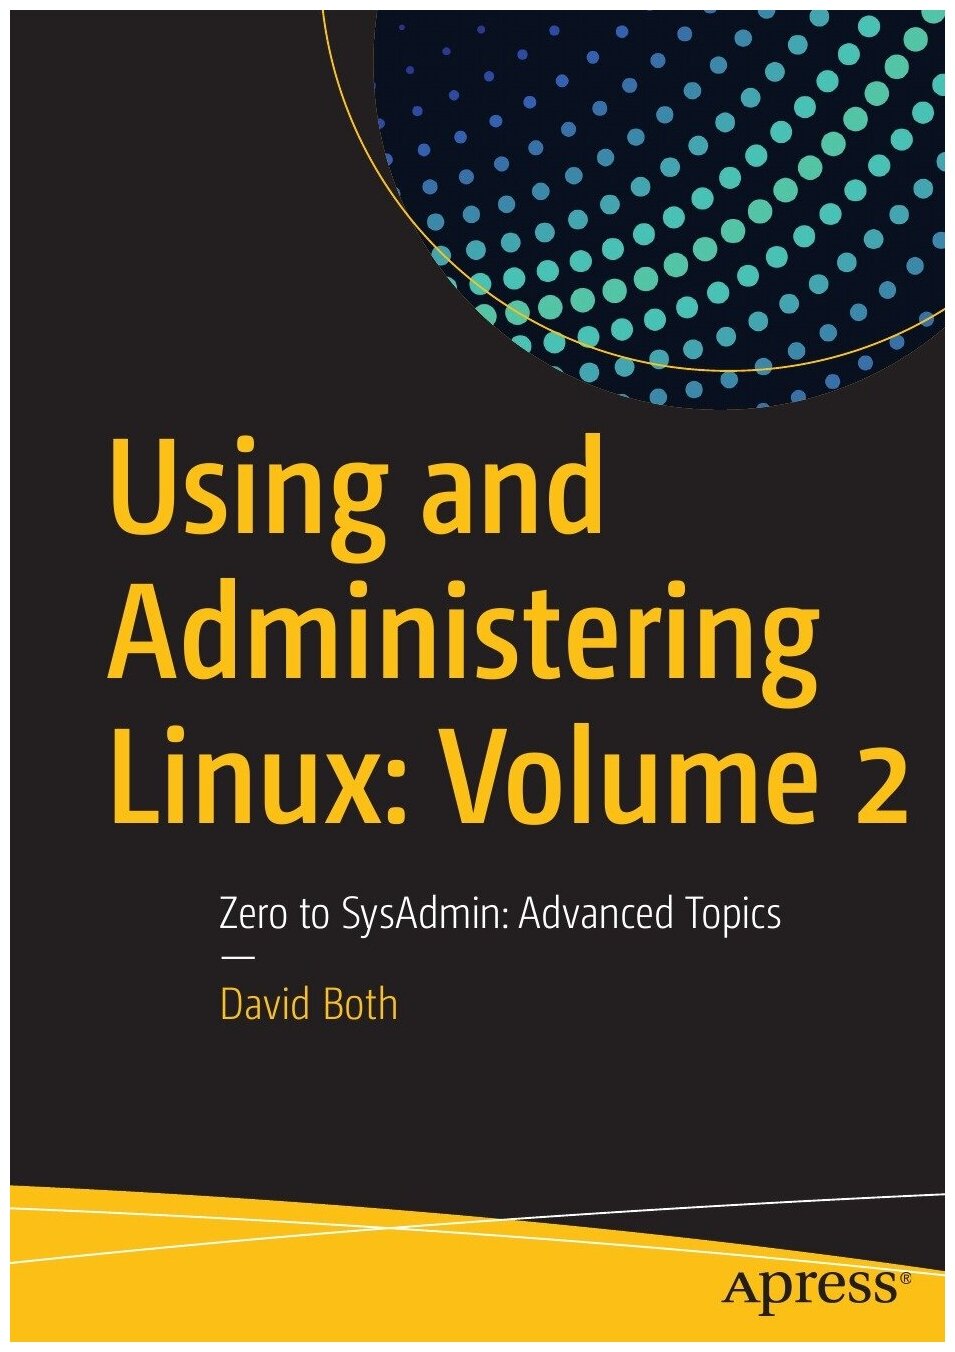 Using and Administering Linux. Volume 2 : Zero to SysAdmin: Advanced Topics